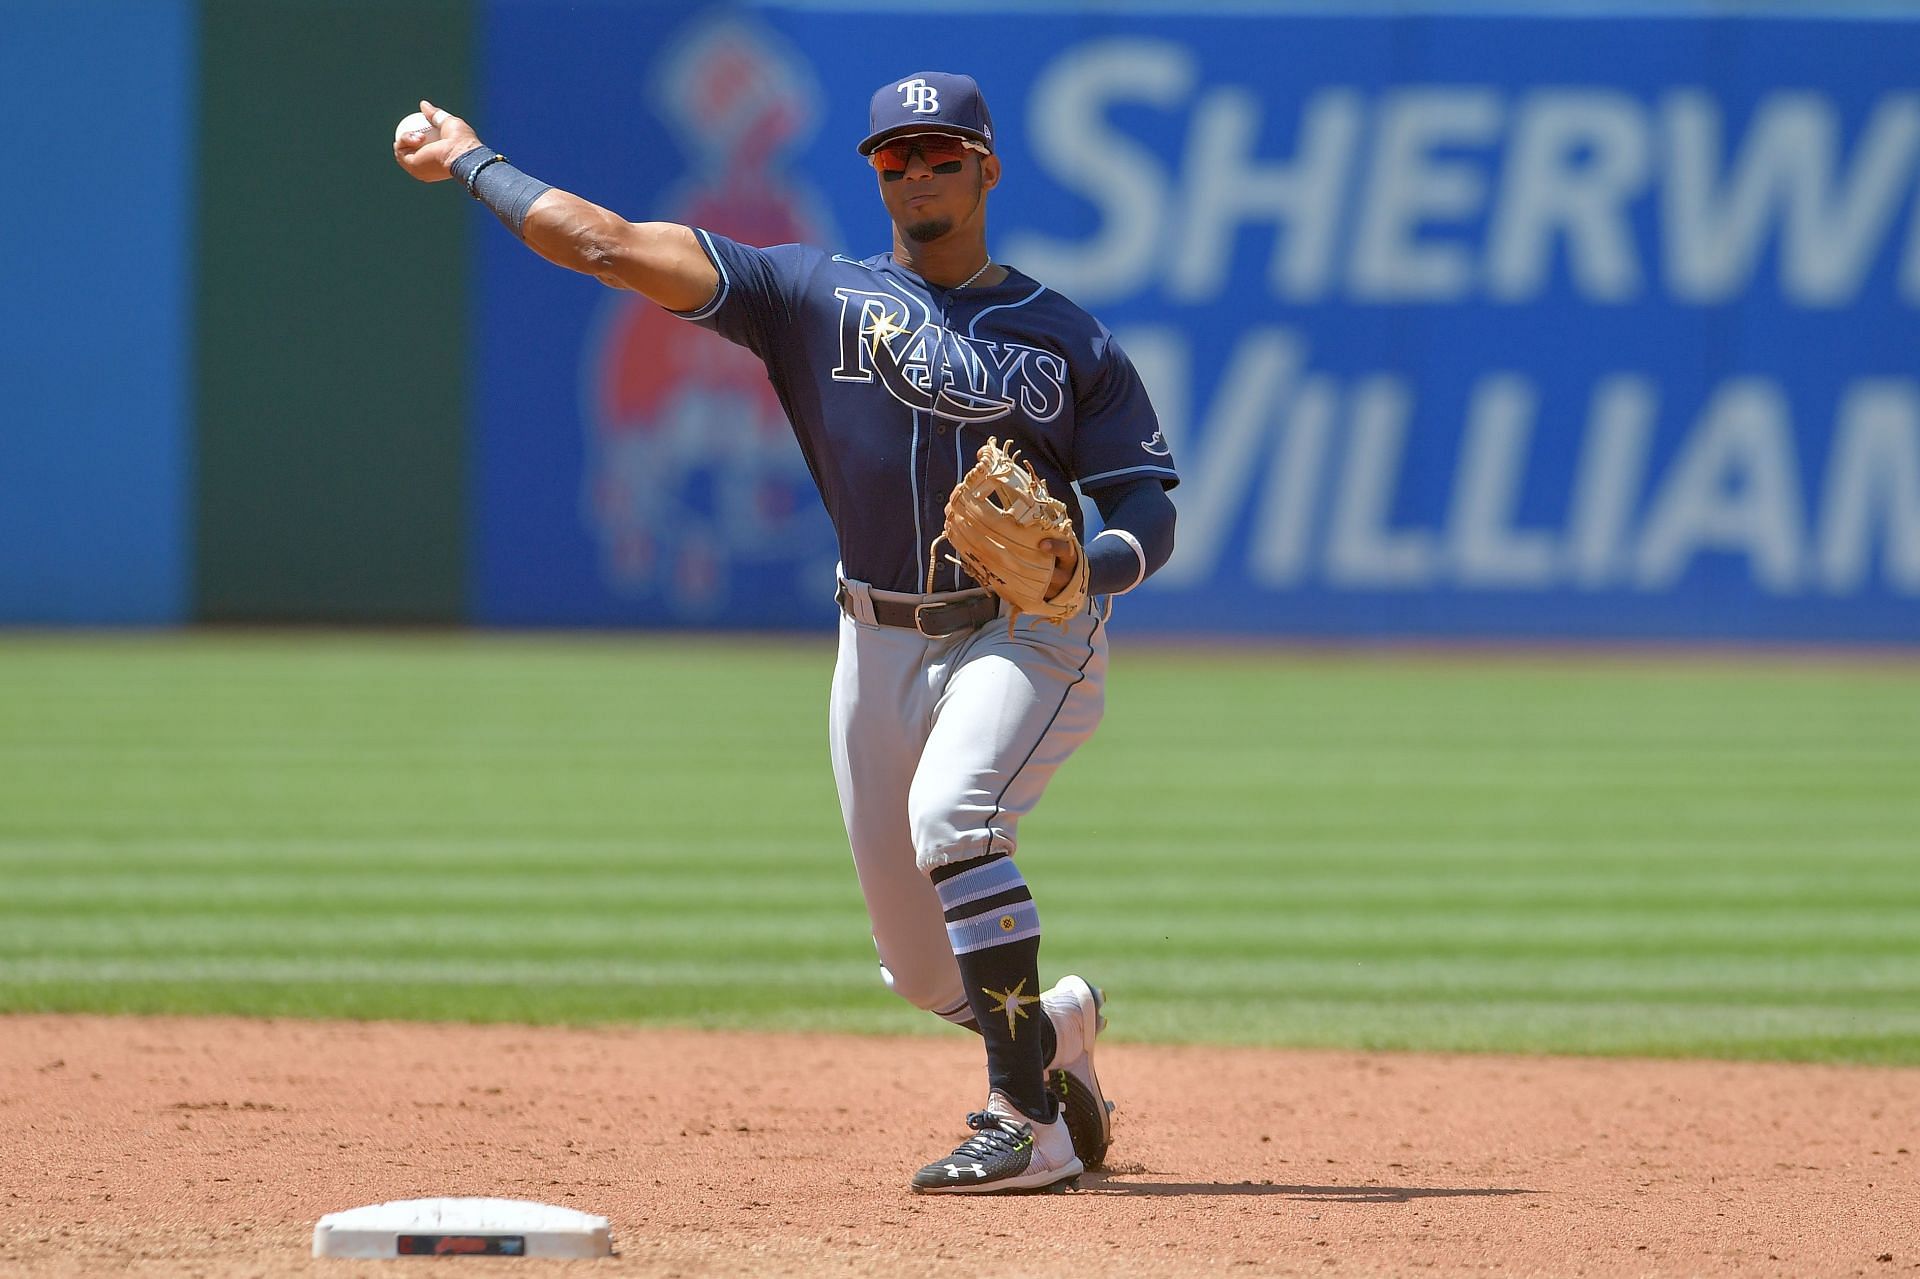 Tampa Bay Rays Projected Lineup for Opening Day. #mlb #fyp #baseball #